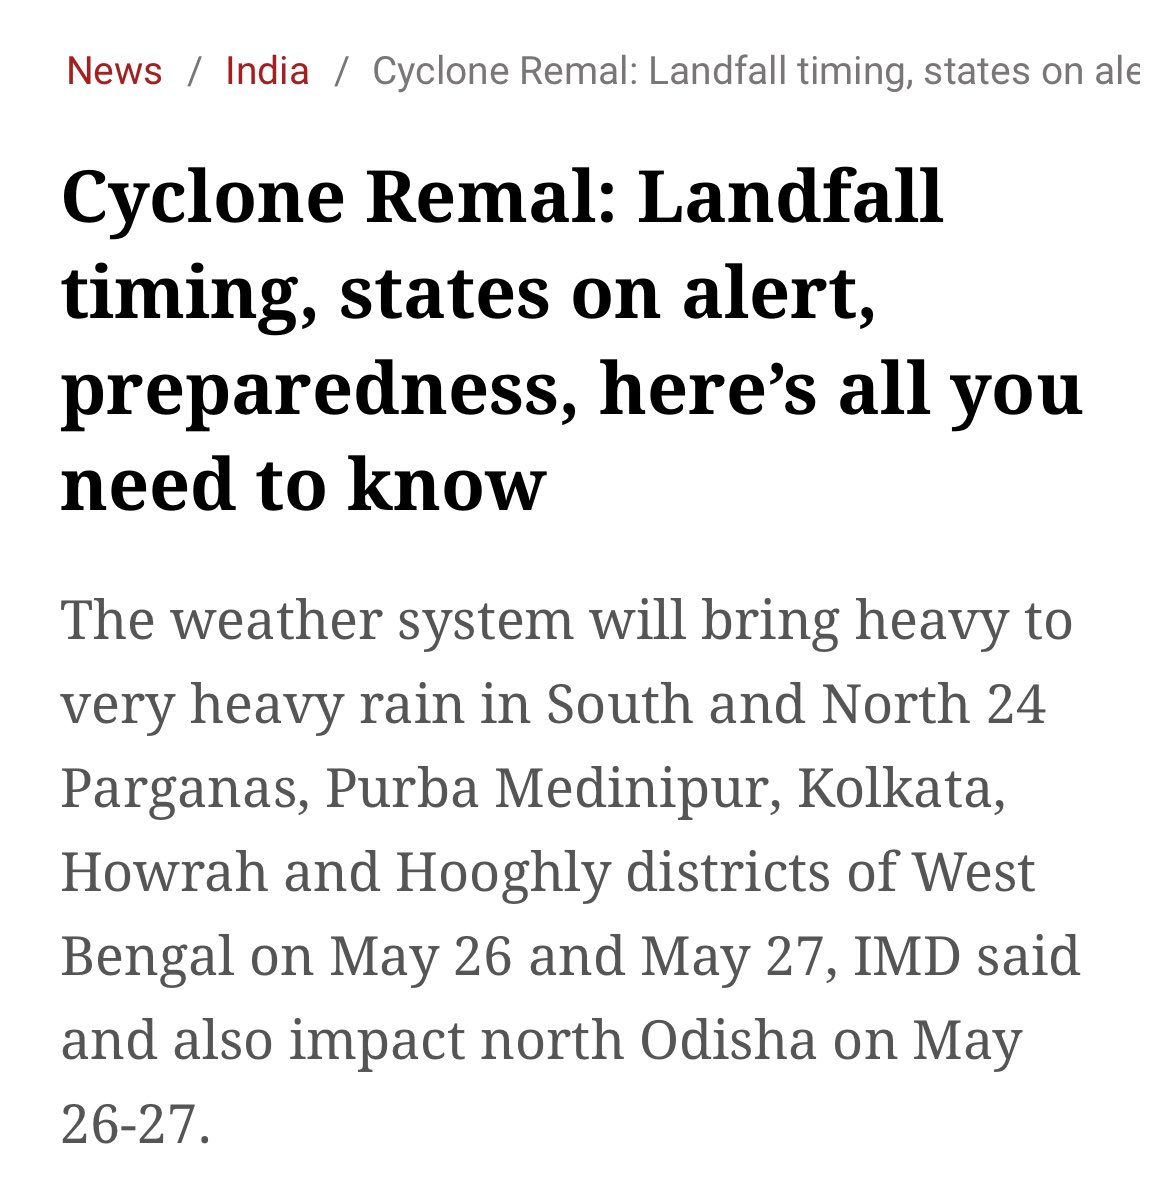 #BreakingNews‌ Cyclone Alert ‼️ 

Cyclone #Remal to make landfall in West Bengal along with the coast regions of Bangladesh on 26th May. 

West Bengal districts under alert 🔔 

• North and South 24 Parganas 
• East Medinipur 
• Kolkata 
• Howrah 
• Hooghly 

The weather